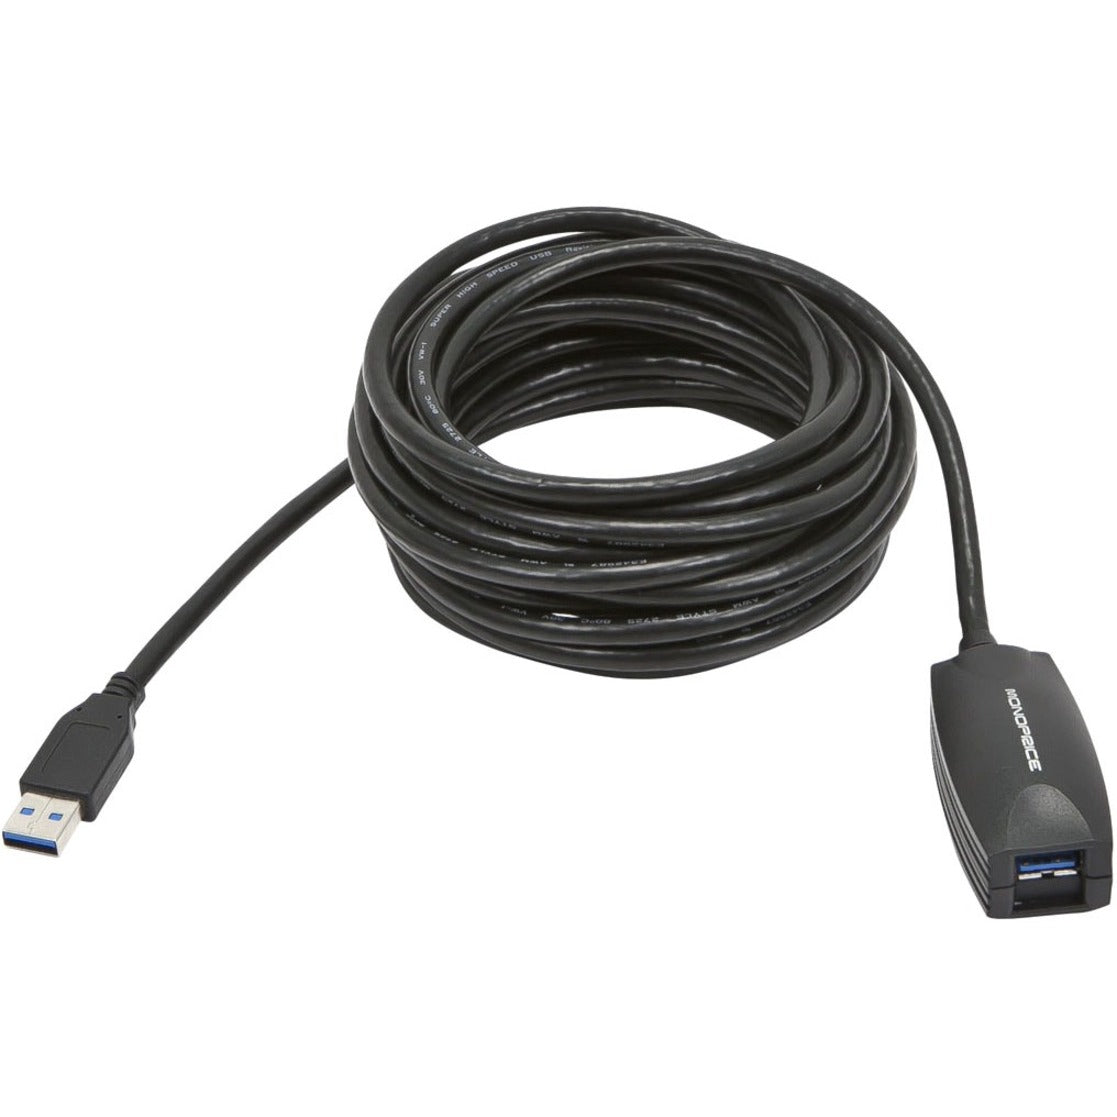 Monoprice 9470 15ft USB 3.0 A Male to A Female Active Extension Cable, Data Transfer Cable